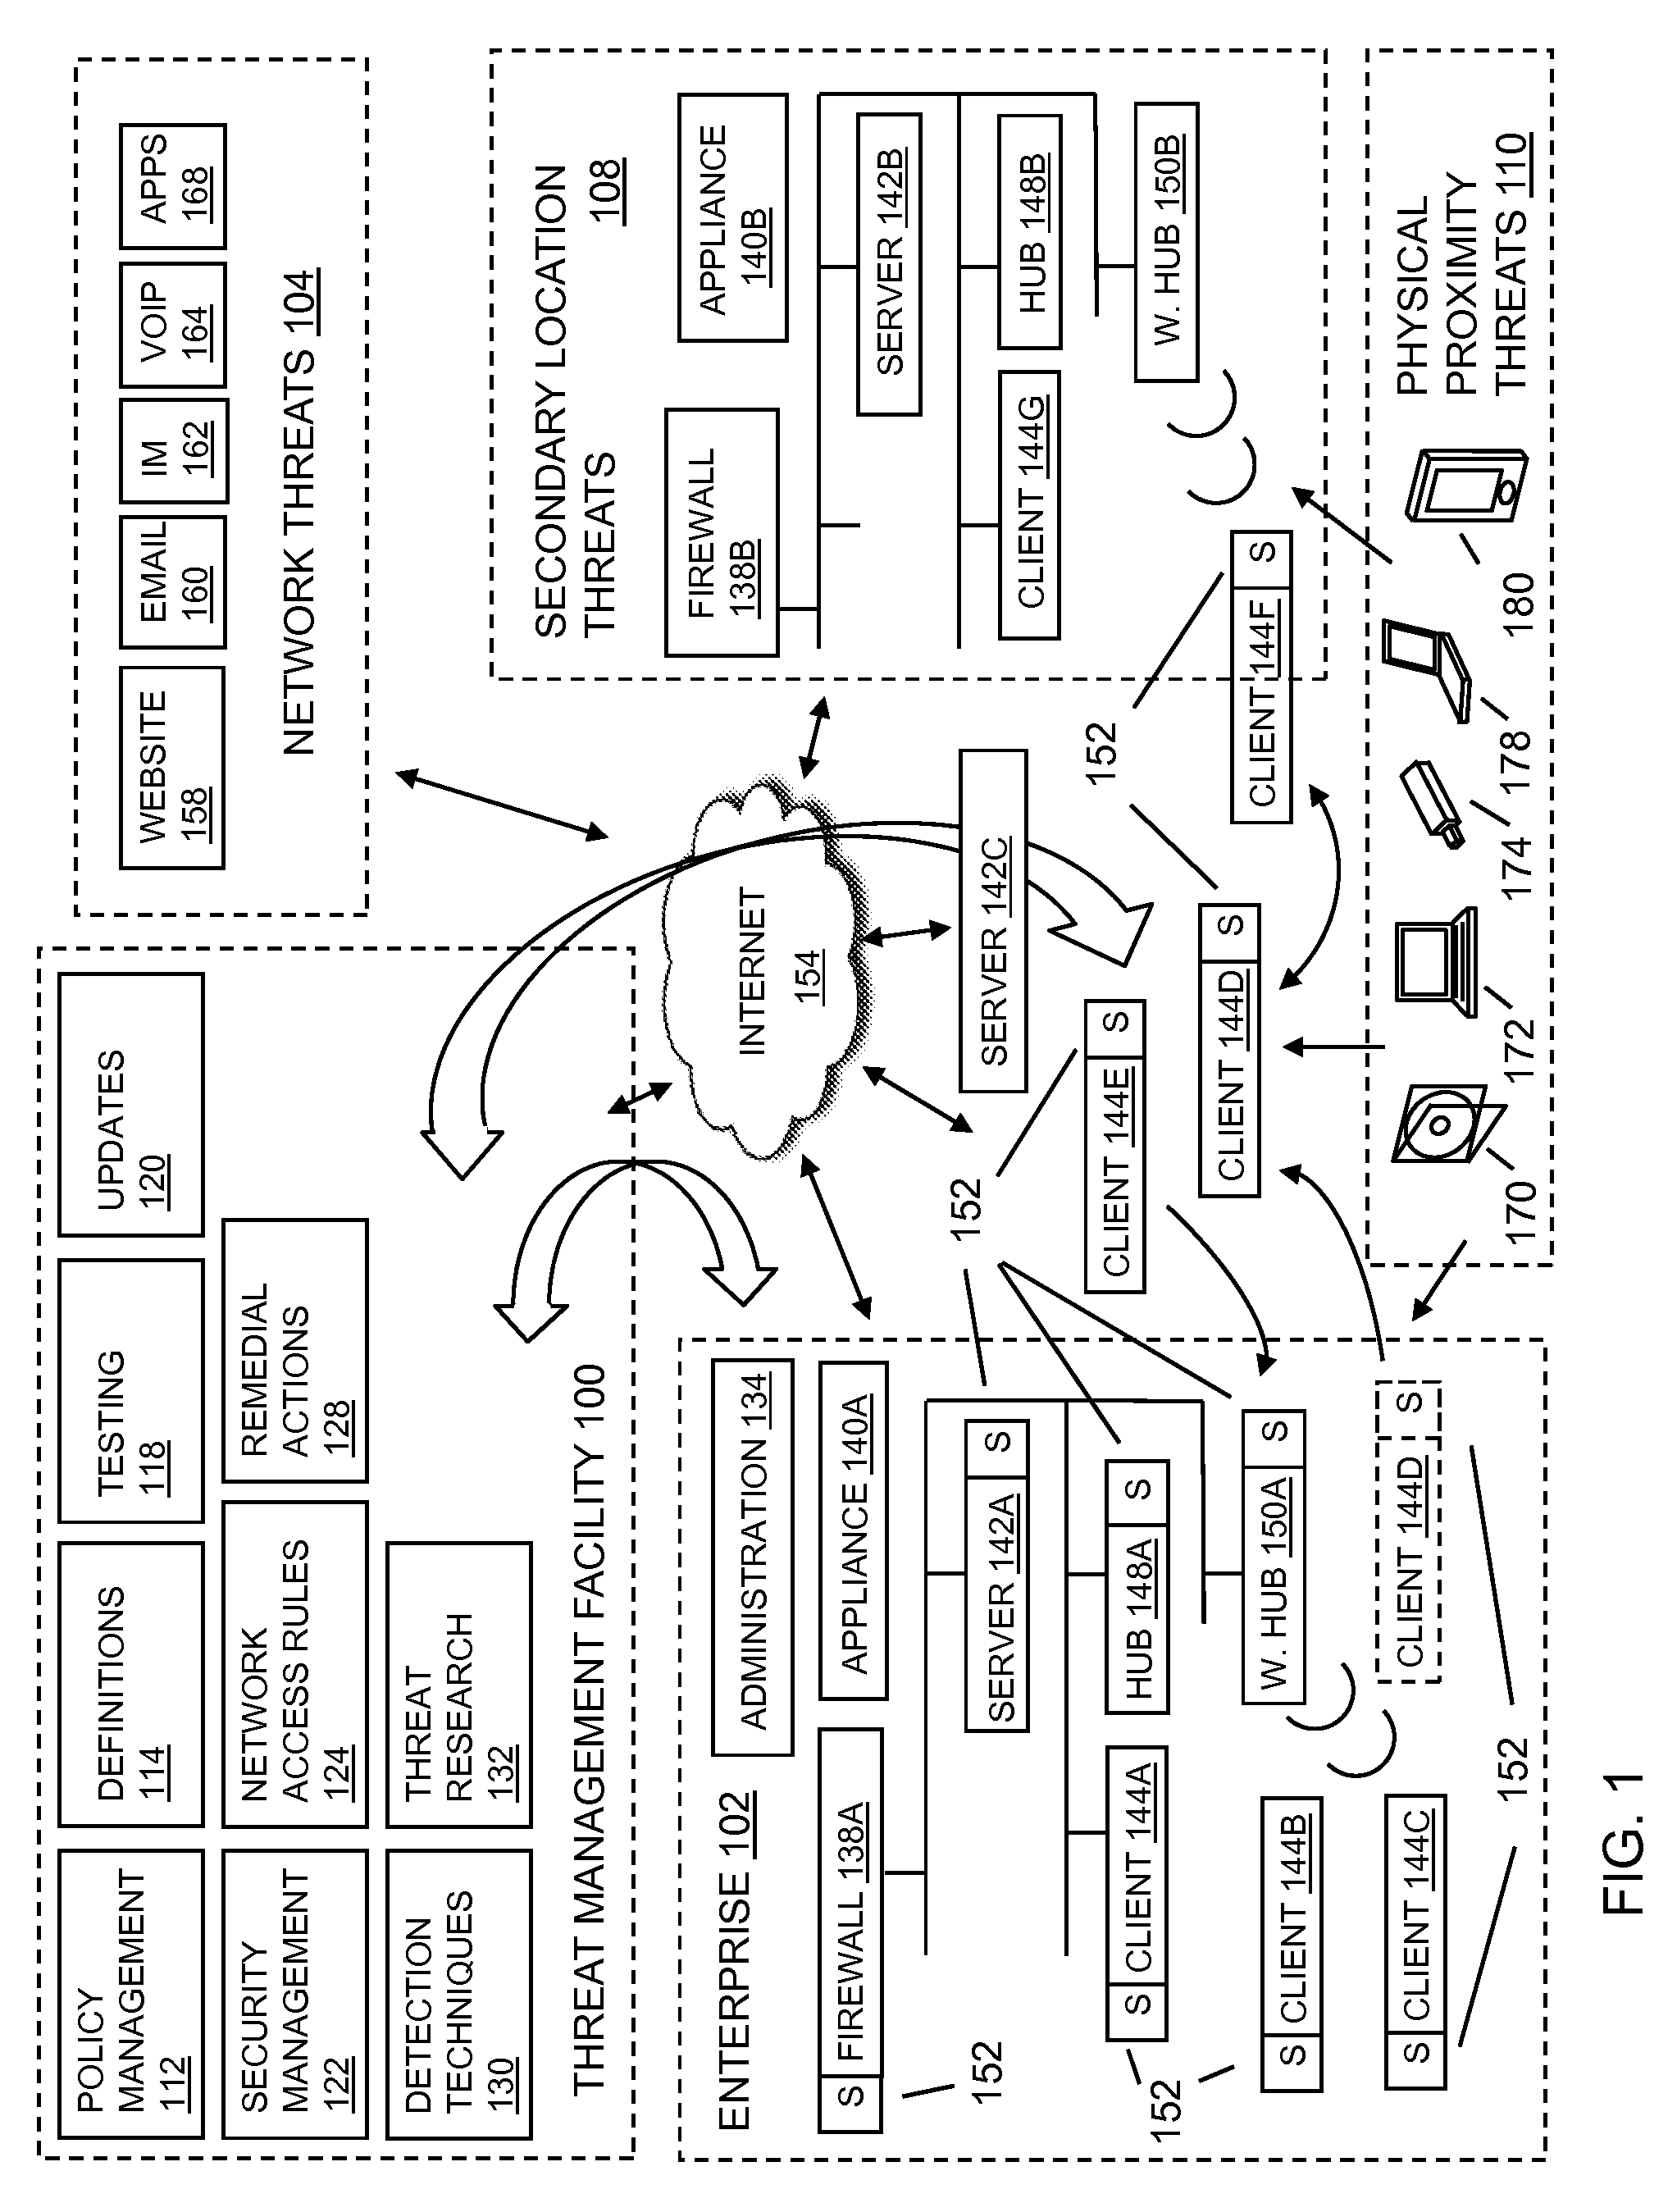 Protected access control method for shared computer resources